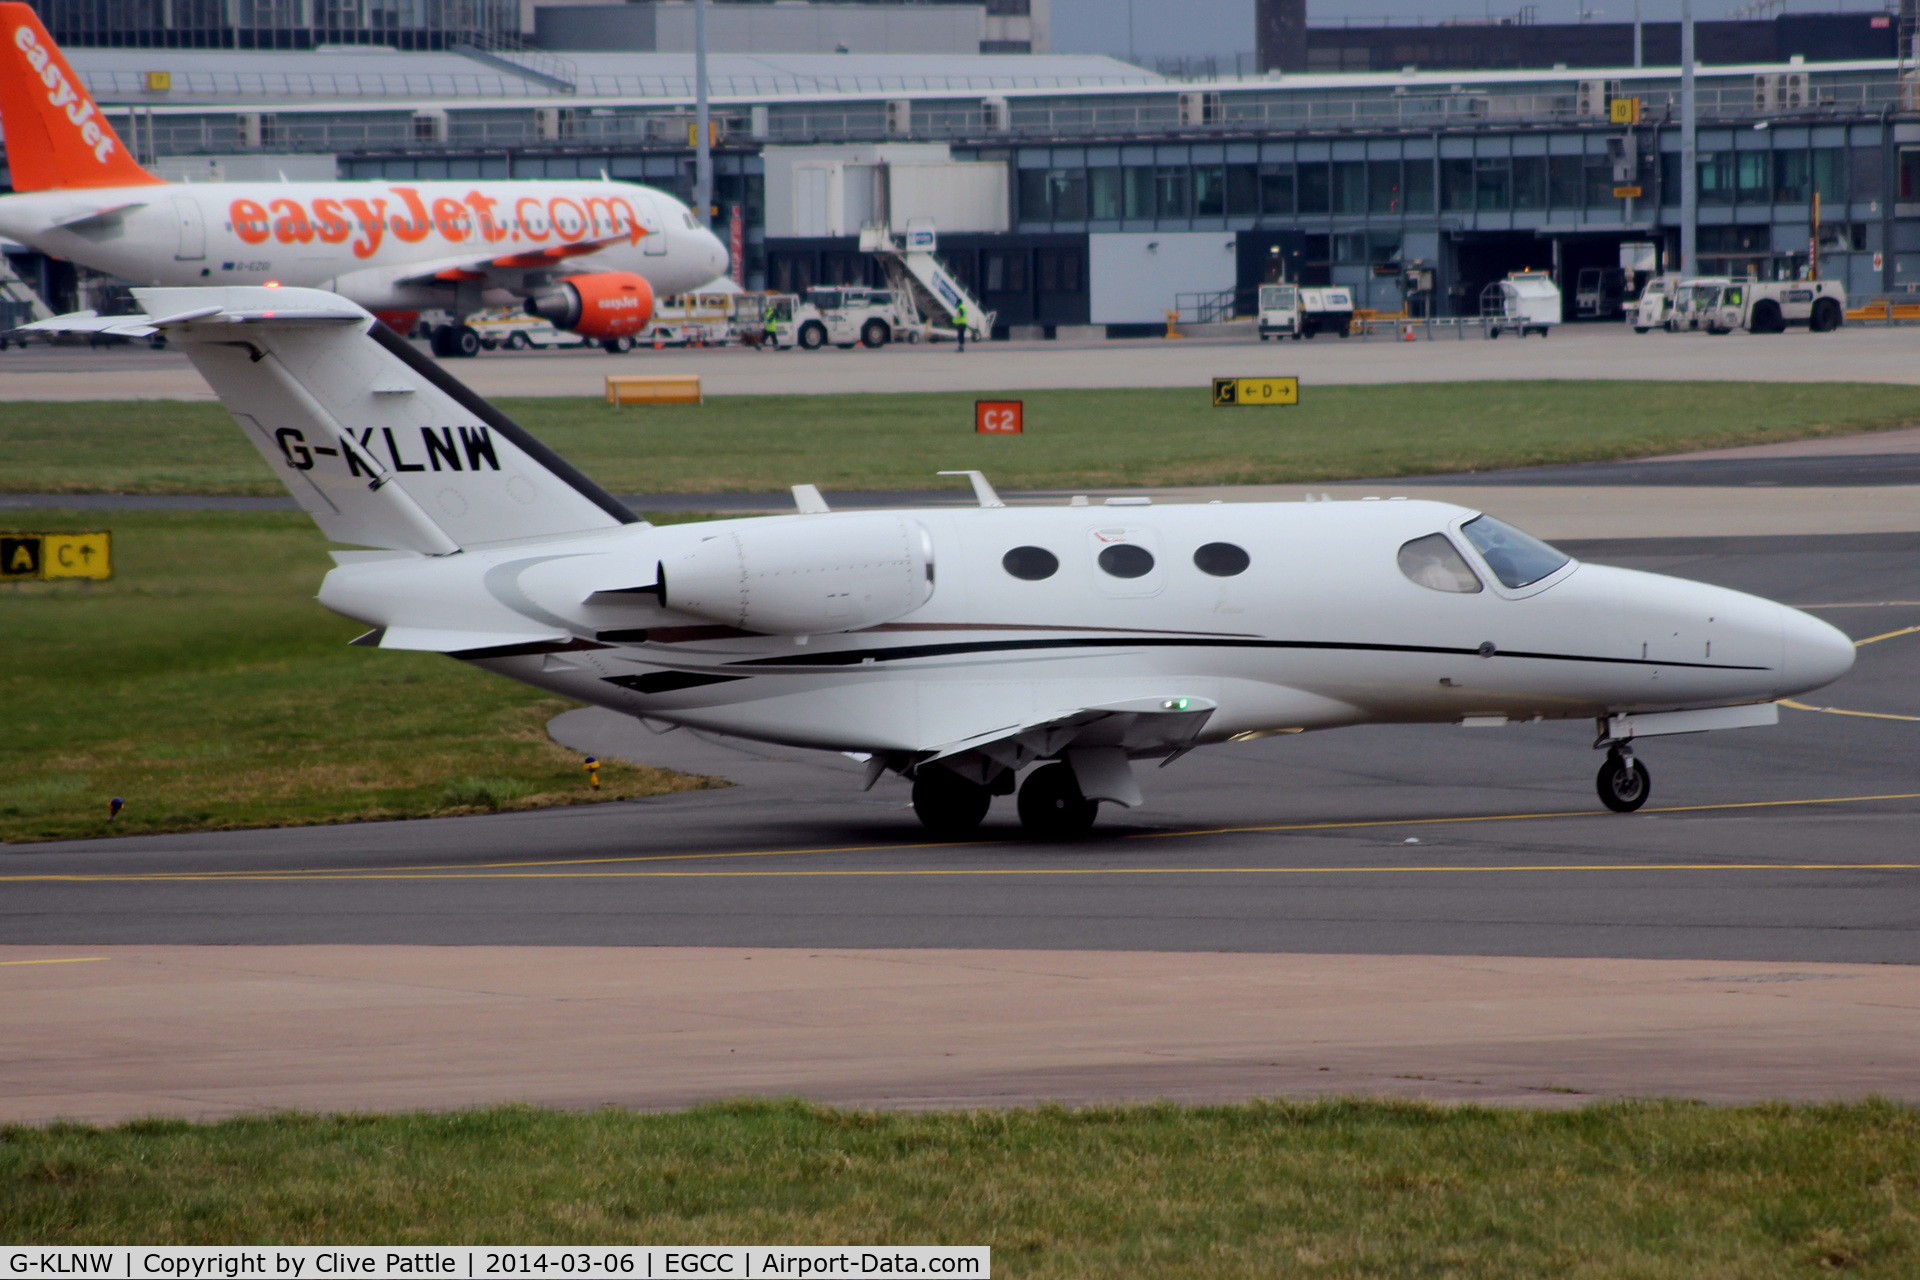 G-KLNW, 2008 Cessna 510 Citation Mustang Citation Mustang C/N 510-0157, Taxi for take-off